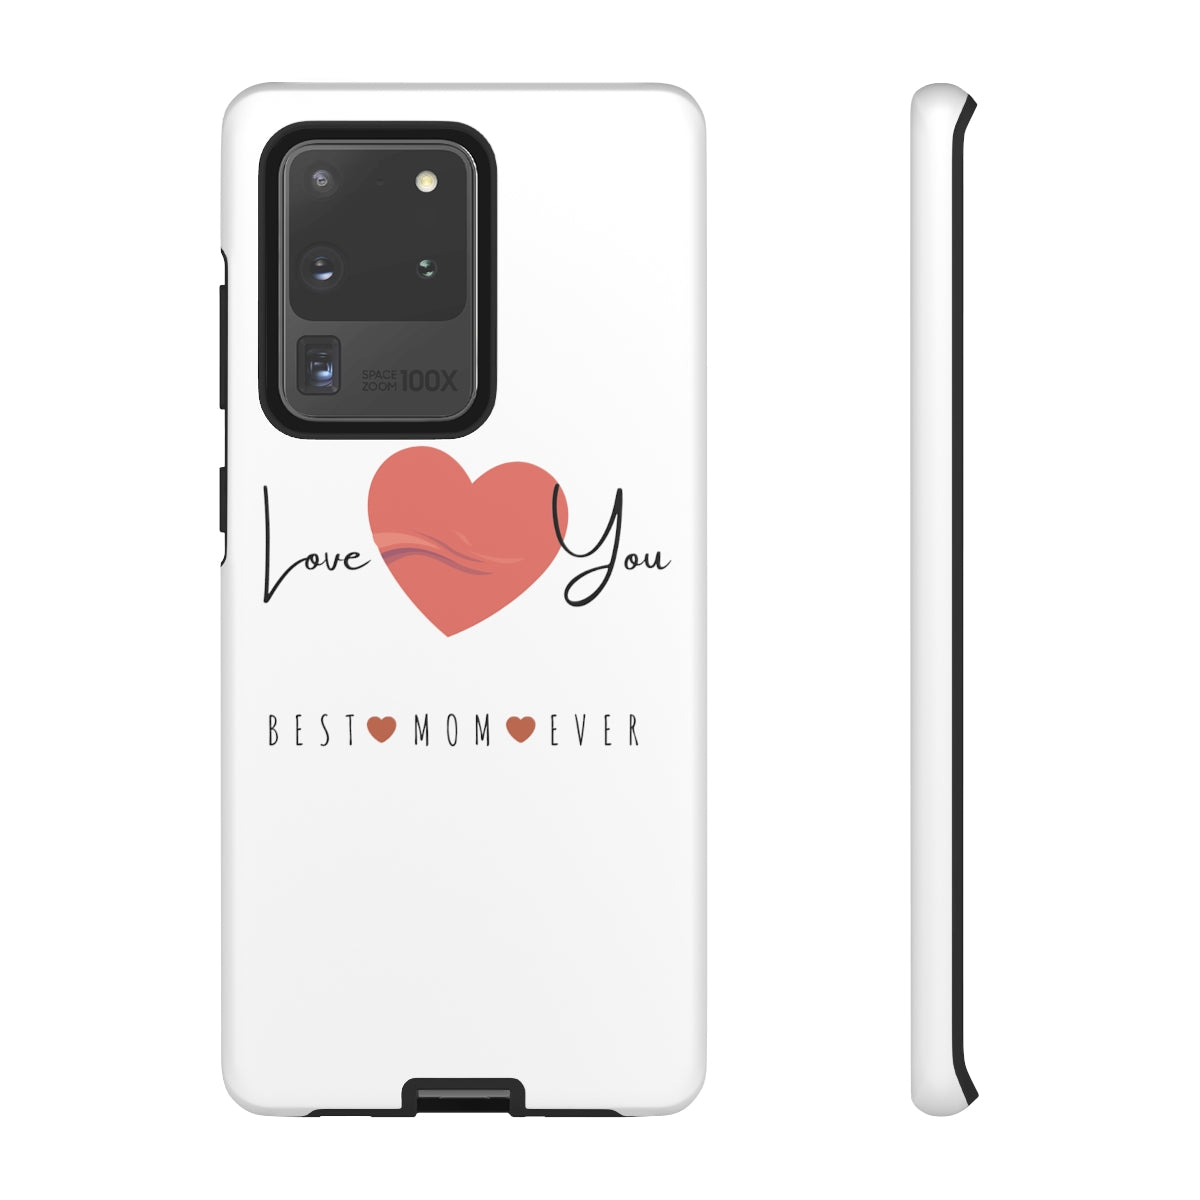 Gift To Mom - Personalized Phone Case - Tough Cases - iPhone 11